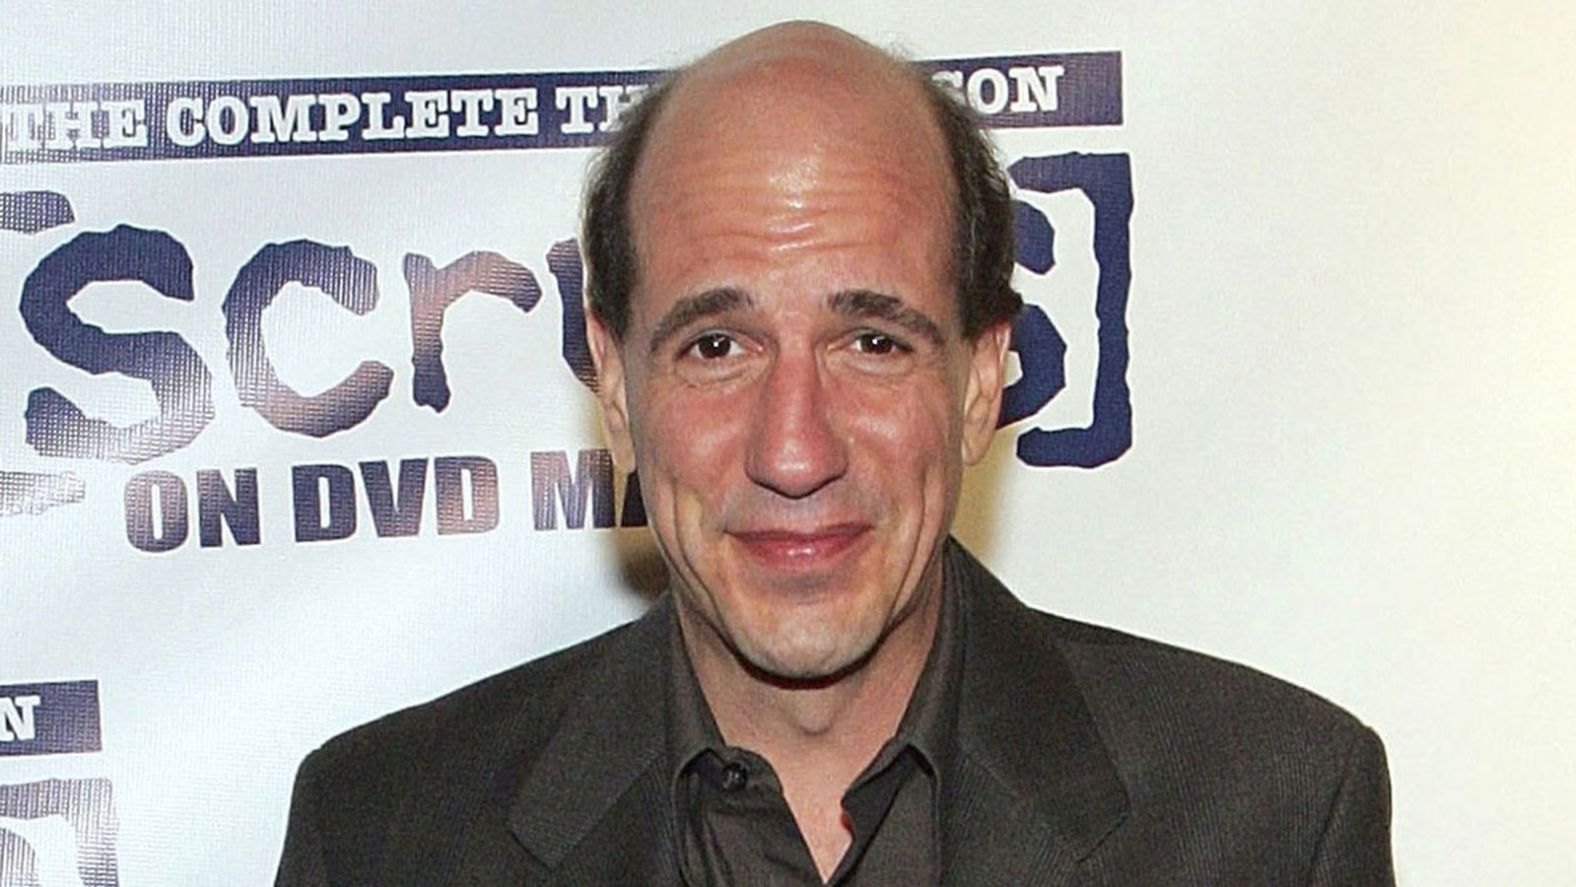 Actor <a href="https://www.cnn.com/2020/05/02/entertainment/sam-lloyd-scrubs-actor-dies/index.html" target="_blank">Sam Lloyd</a>, who most notably portrayed lawyer Ted Buckland on the TV comedy "Scrubs," died at age 56, his agent said May 1. Lloyd's television career also included roles in "Desperate Housewives," "Seinfeld," "Modern Family," "The West Wing," "Cougar Town," "Malcolm in the Middle" and "Shameless," according to his agent.